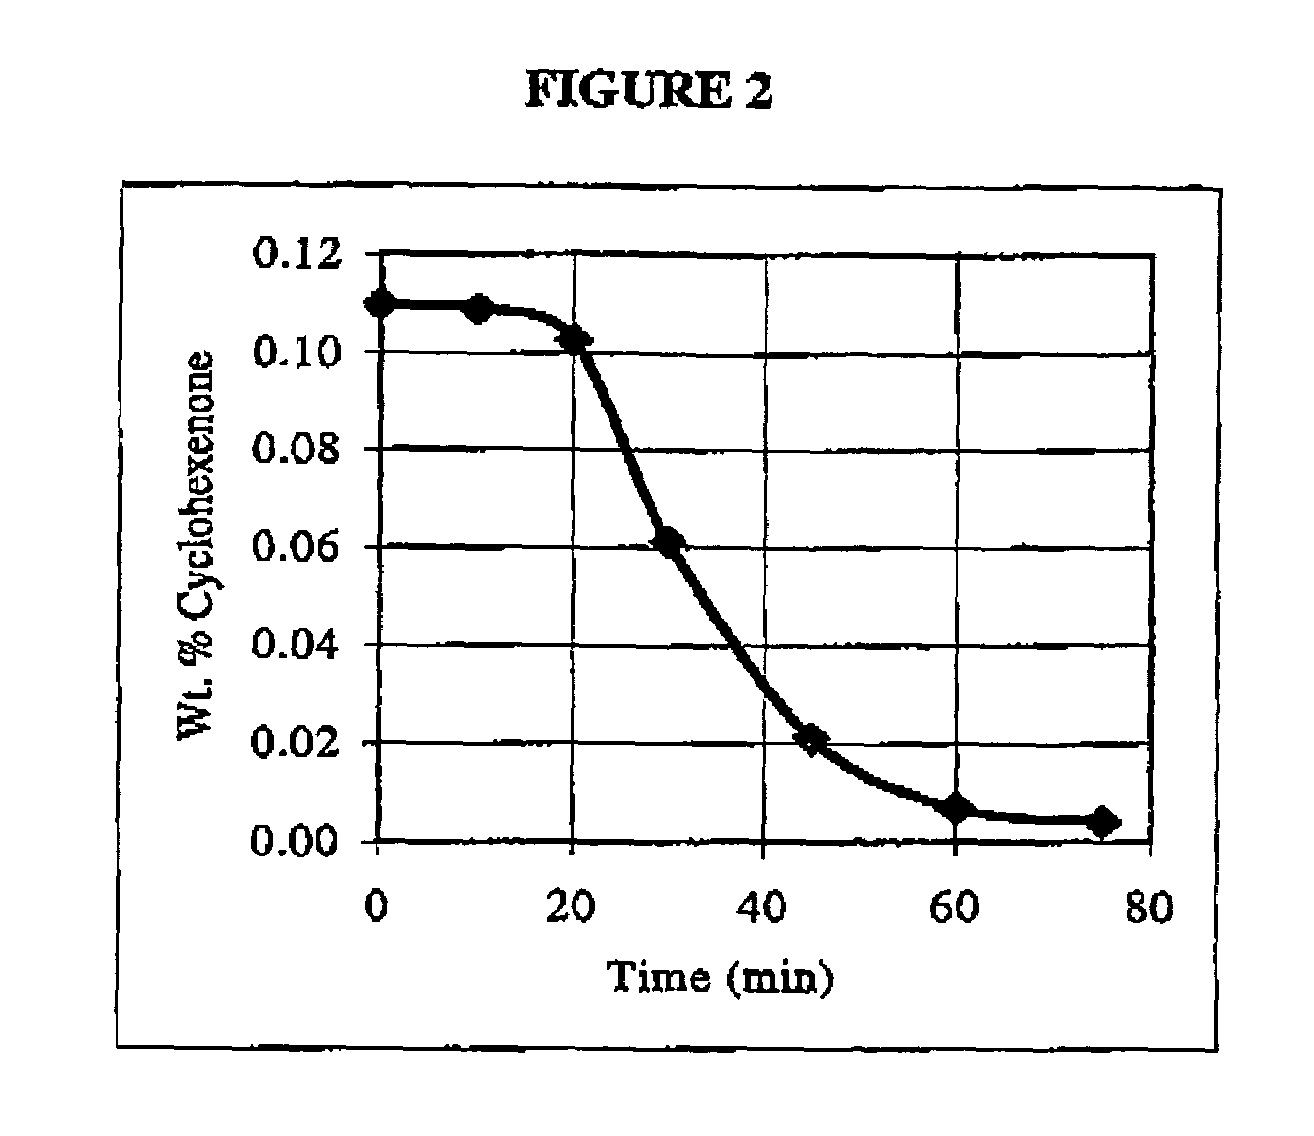 Method for reducing cyclohexenone content of a cyclohexenone-containing organic mixture